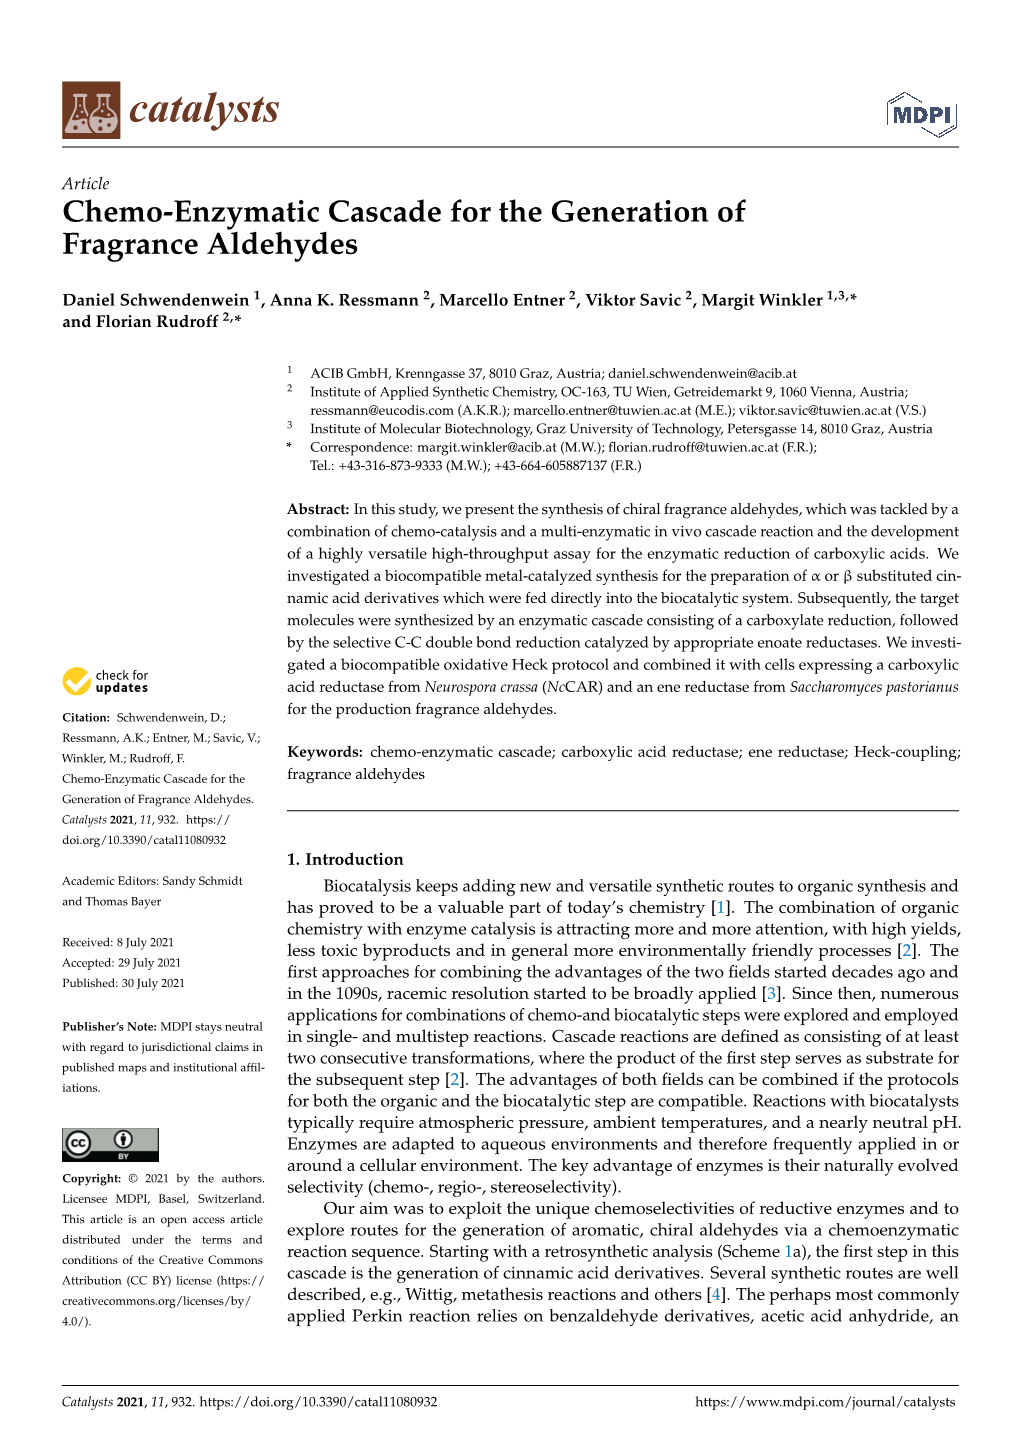 Chemo-Enzymatic Cascade for the Generation Offragrance Aldehydes